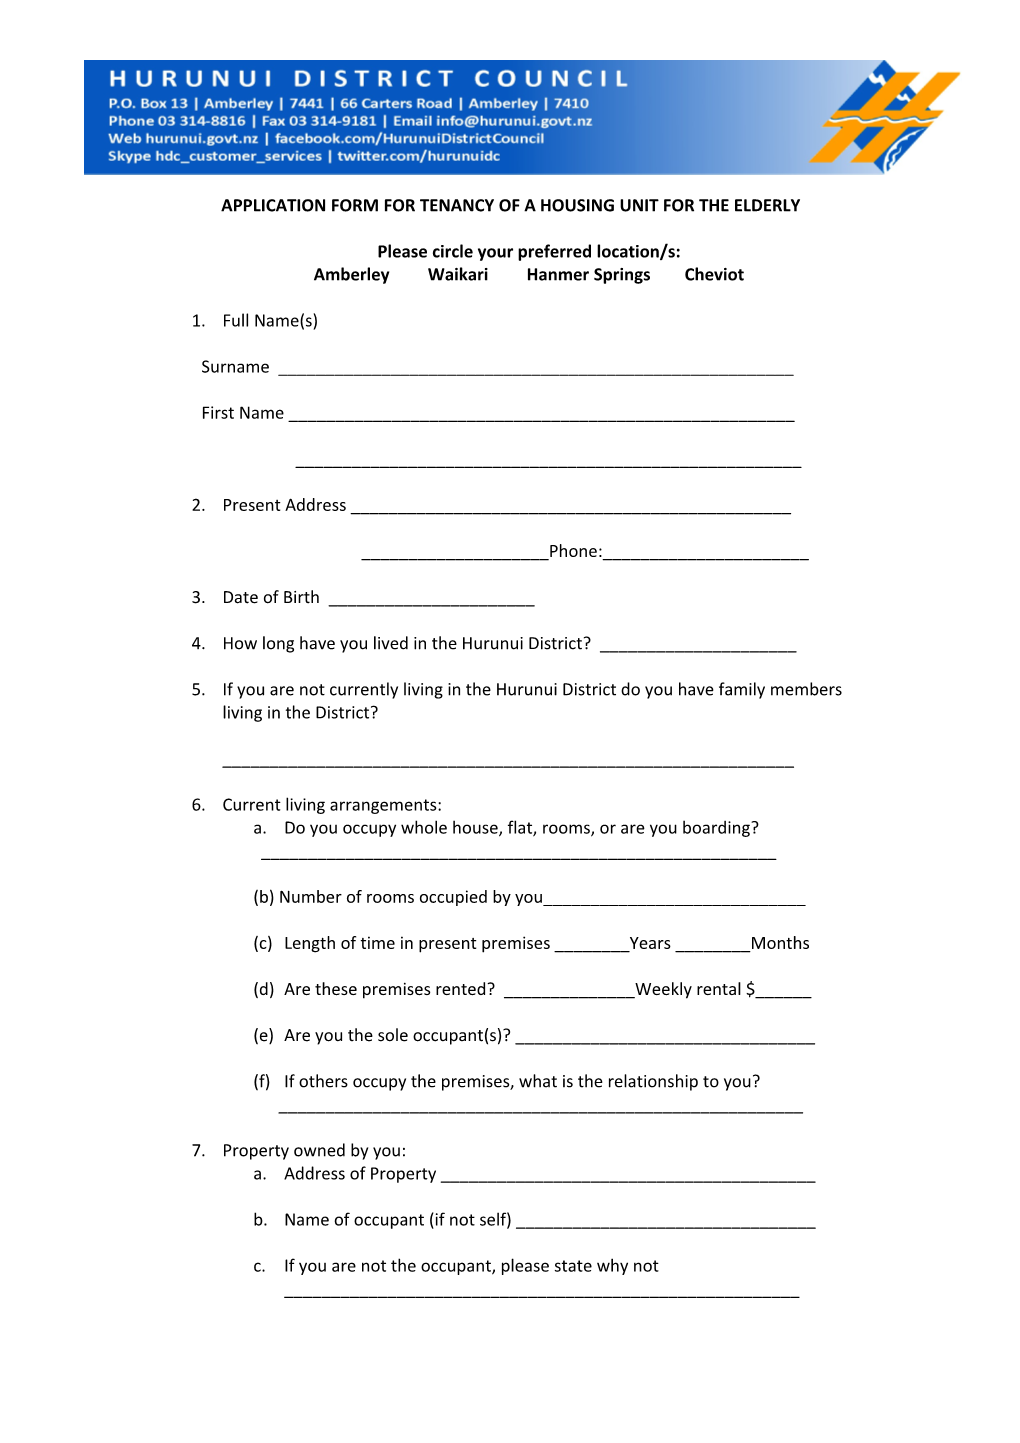 Application Form for Tenancy of a Housing Unit for the Elderly